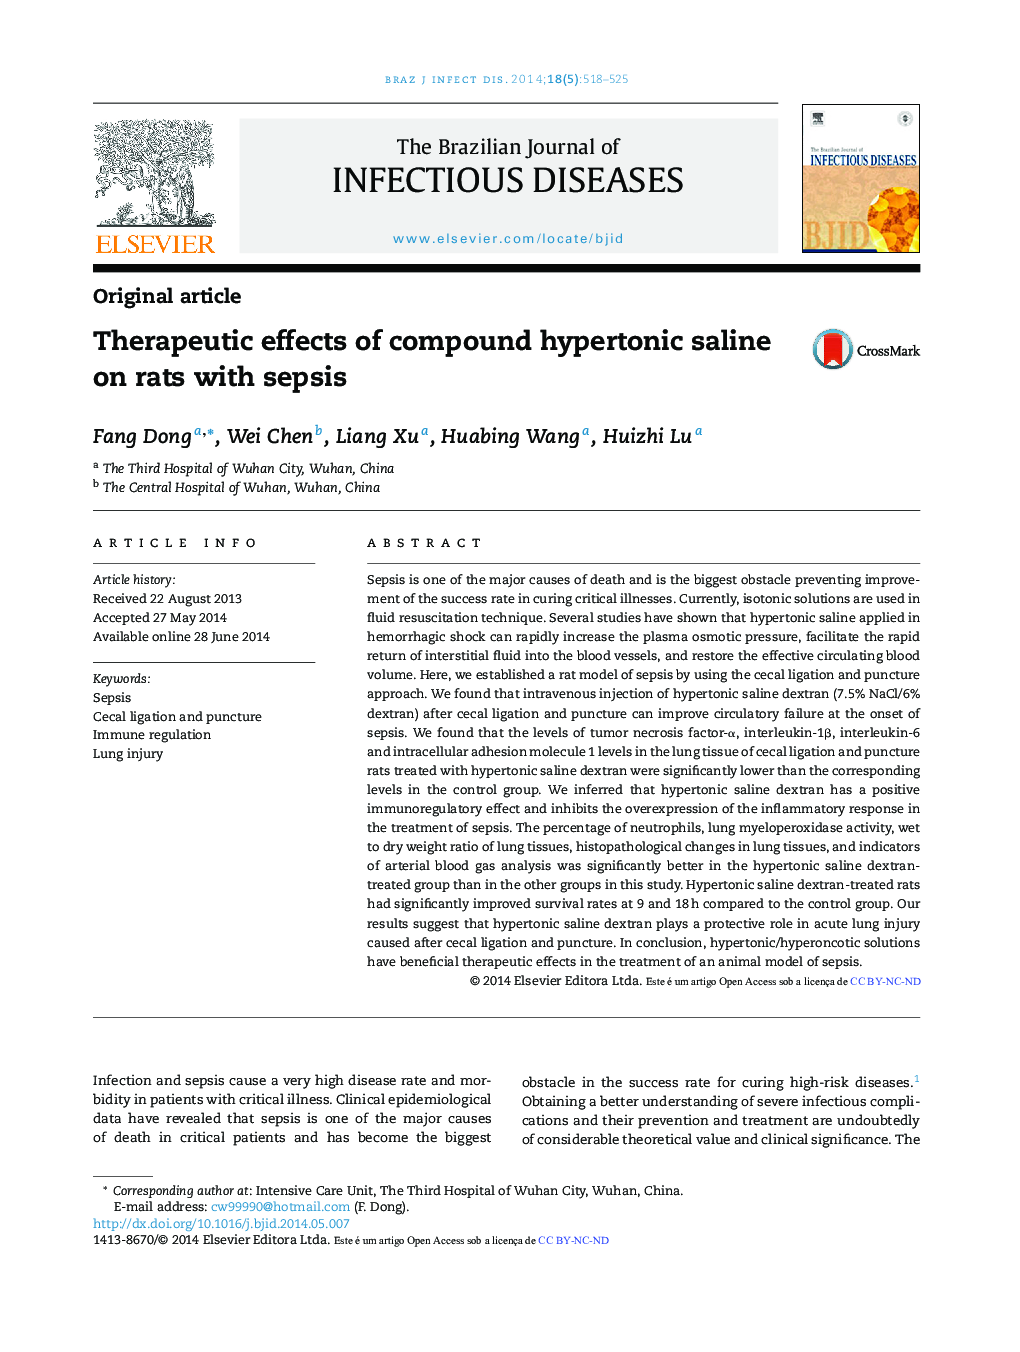 Therapeutic effects of compound hypertonic saline on rats with sepsis